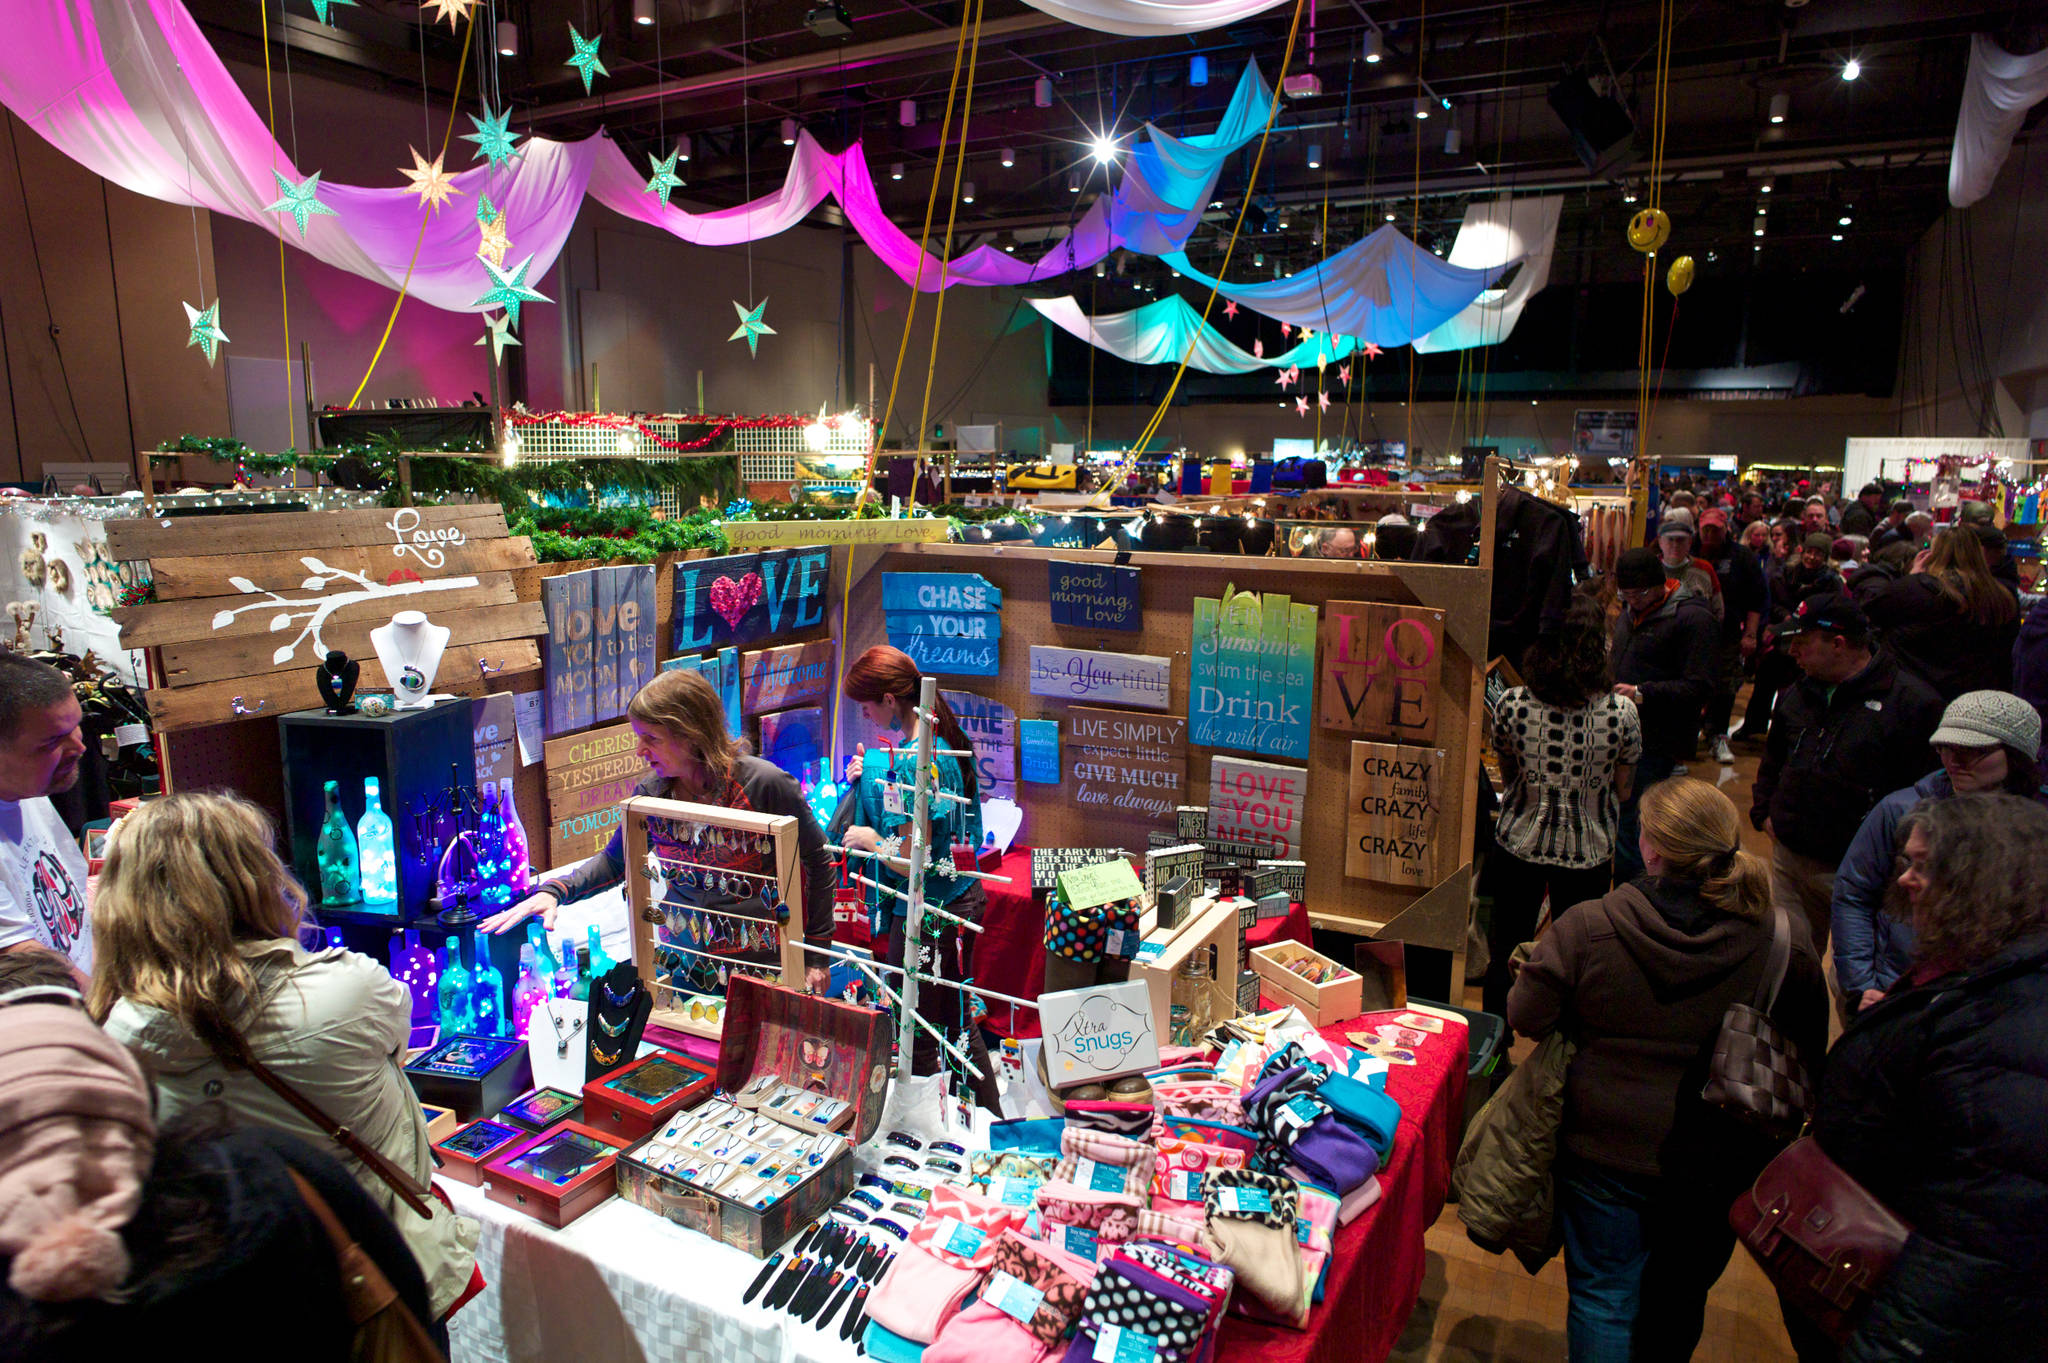 Vendors and customers flood the floor at Centennial Hall during the Public Market in November 2014. This year, 206 vendors will be at Juneau Arts & Culture Center, Centennial Hall and Elizabeth Peratrovich Hall. (Michael Penn | Juneau Empire File)